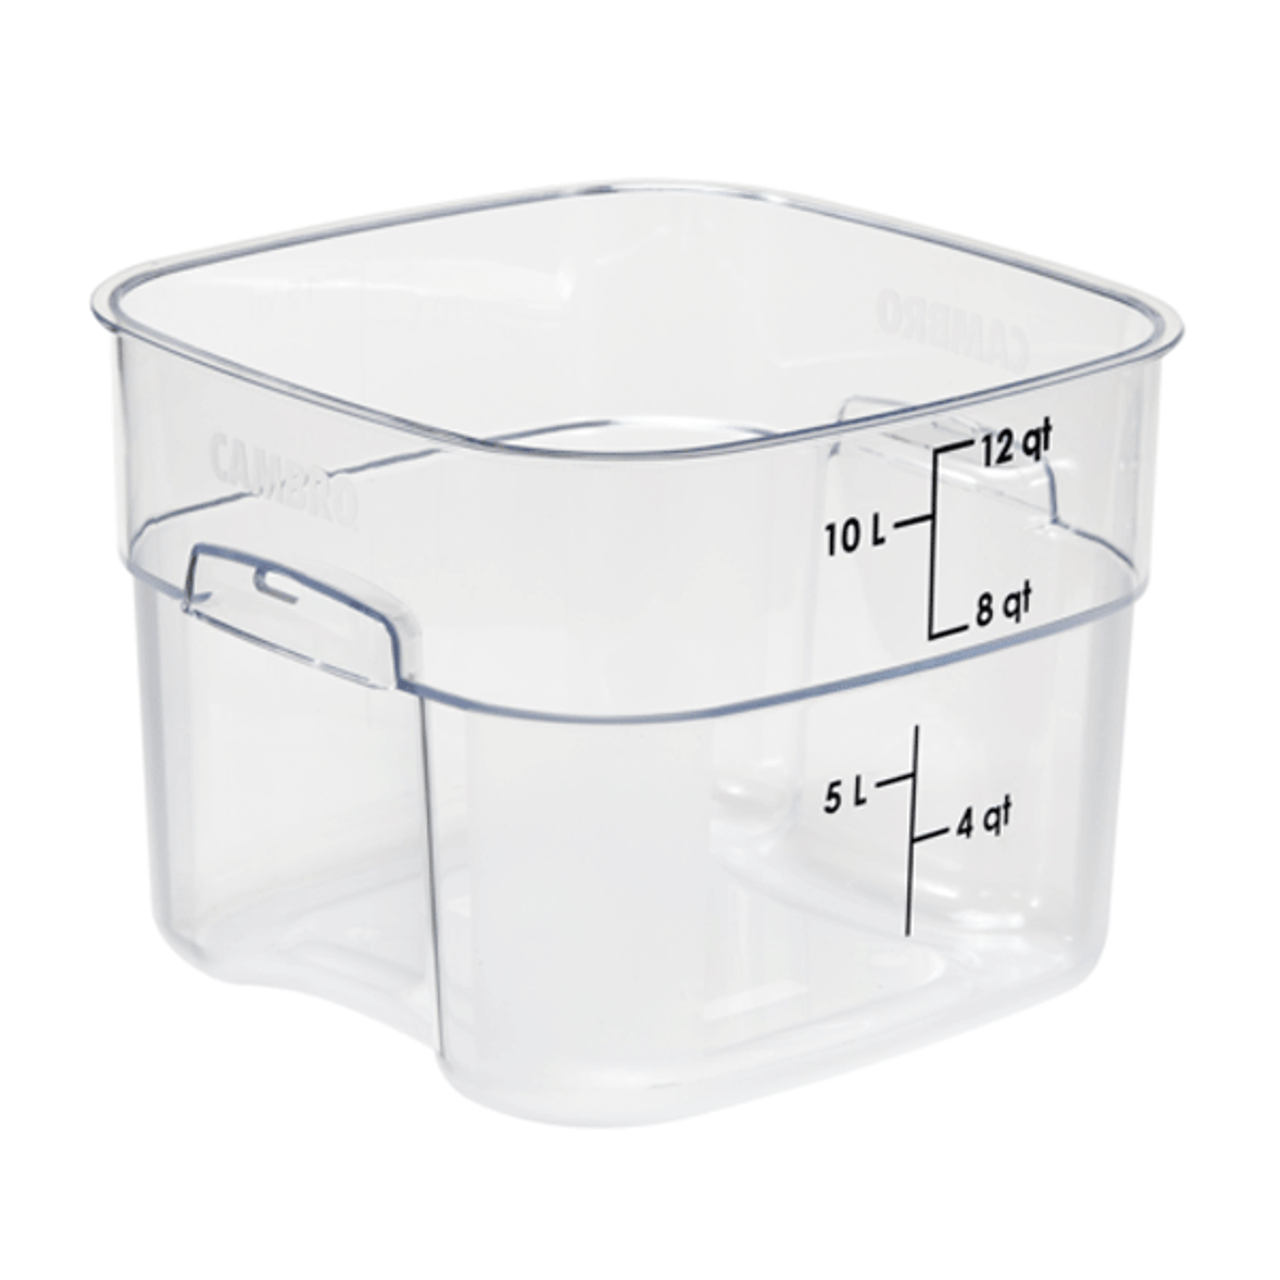 https://cdn11.bigcommerce.com/s-g3i86bef61/images/stencil/1280x1280/products/4507/4696/Cambro-12SFSPROCW135-FreshPro-12qt__02639.1680728639.png?c=1